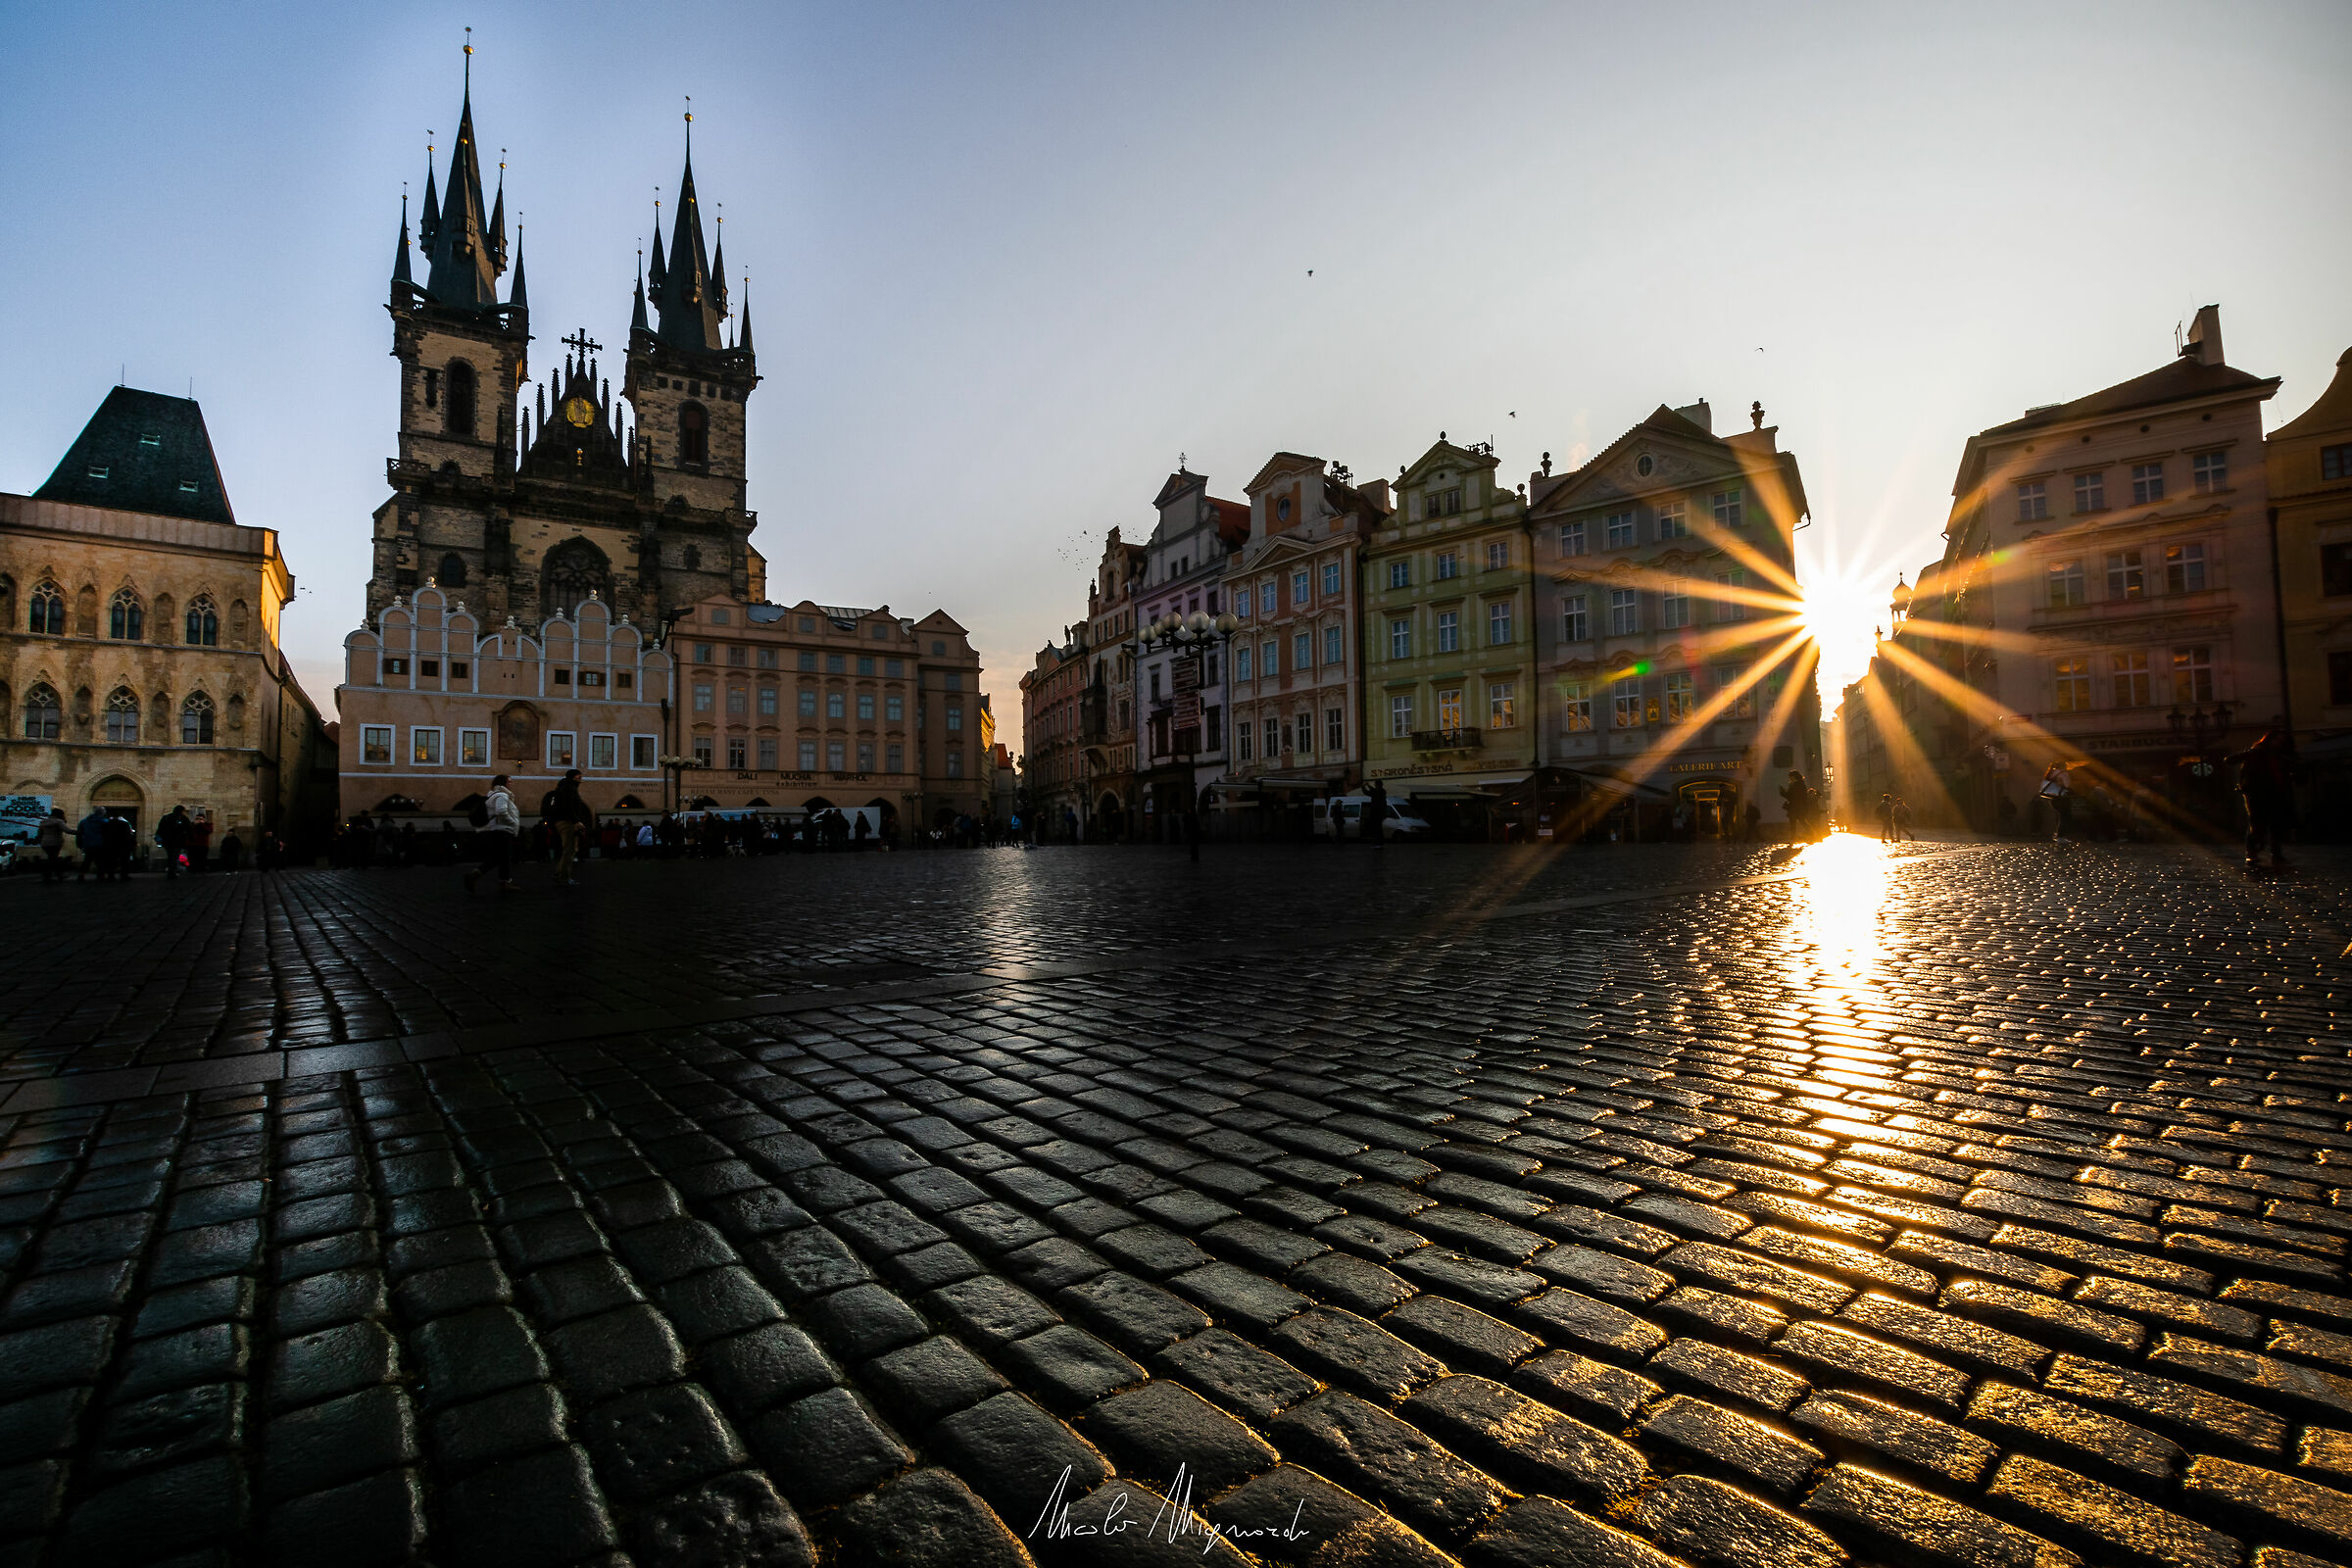 Morning at the Old Town Square...